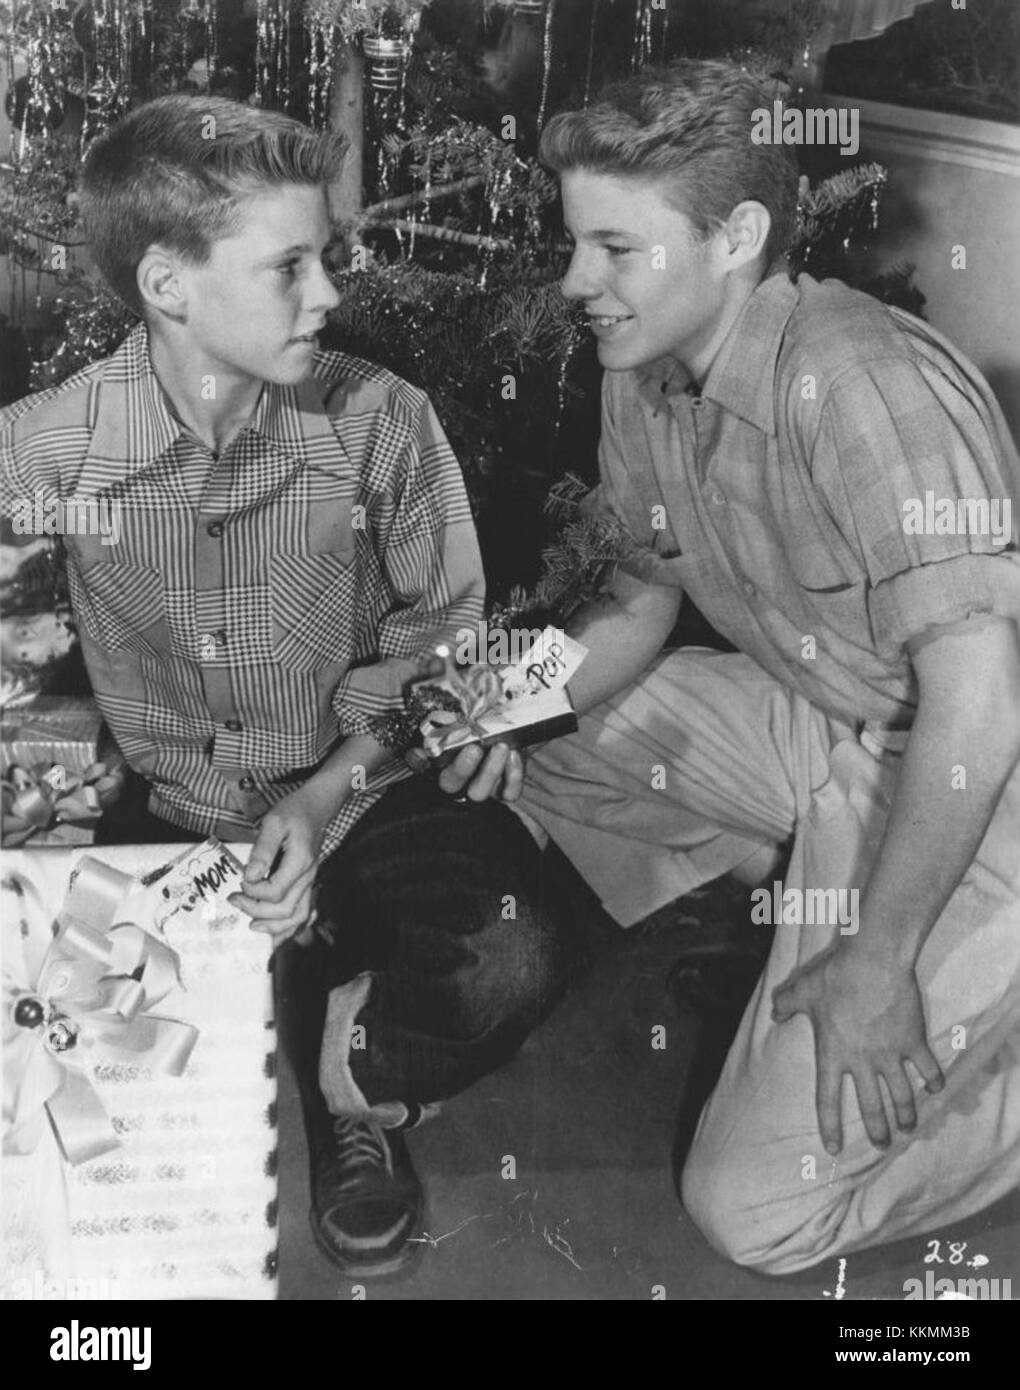 David Nelson, right, is 16, and Rick is 12 in this scene from 'The Late Christmas Gift,' a 13-year-old Ozzie and Harriet rehun to be shown Wednesday evening at 7:30 o'clock over Channel 4. The story concerns a late Christmas gift sent by Grandma Nelson which has the entire family puzzled. Adv of Ozzie and Harriet Ricky Nelson David Nelson 1952 Stock Photo